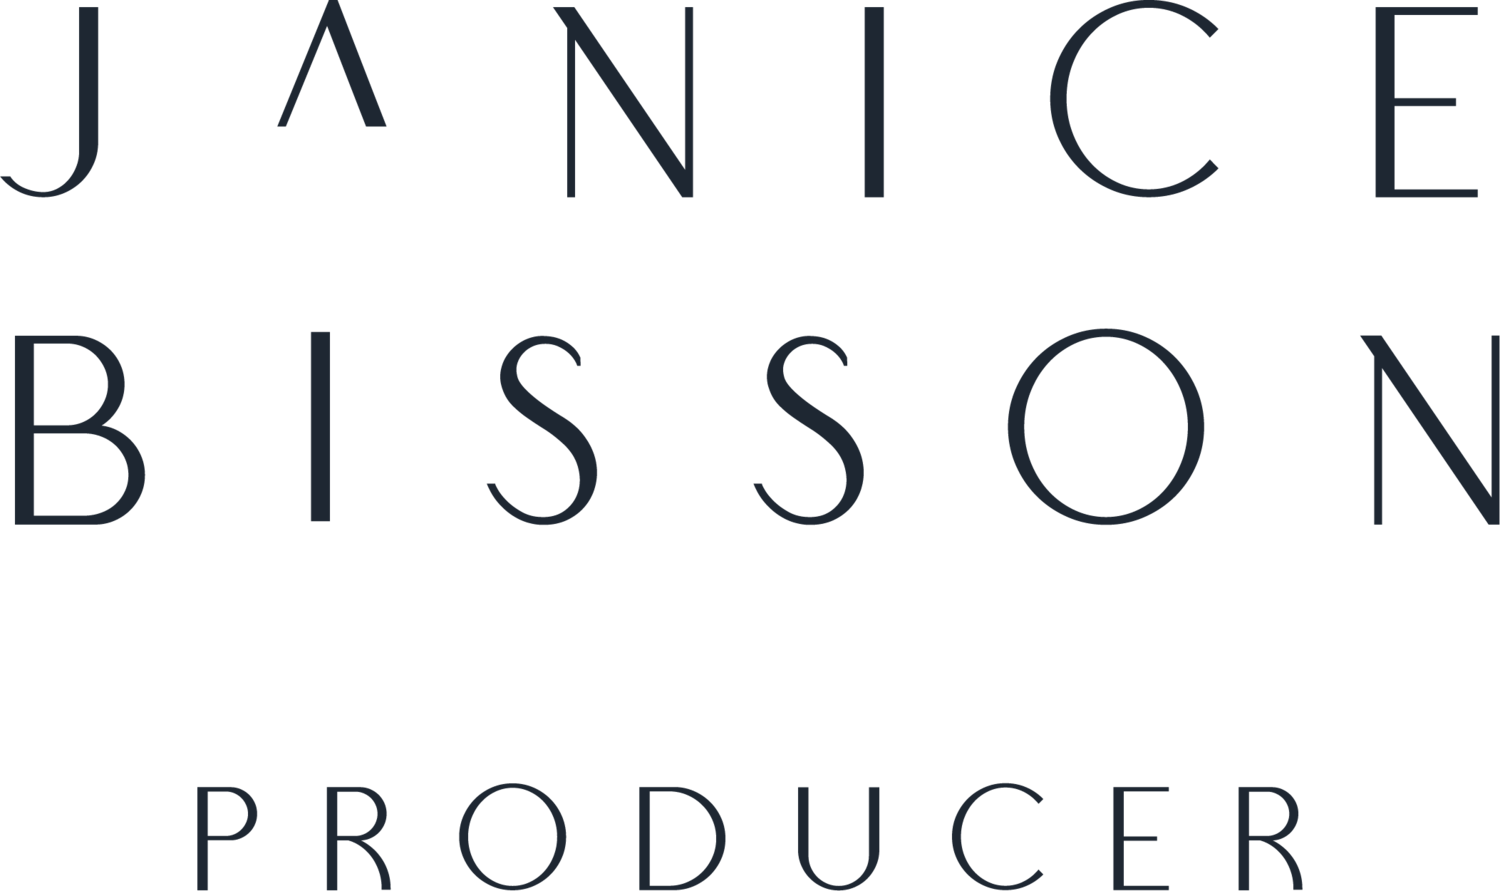 Janice Bisson | Producer